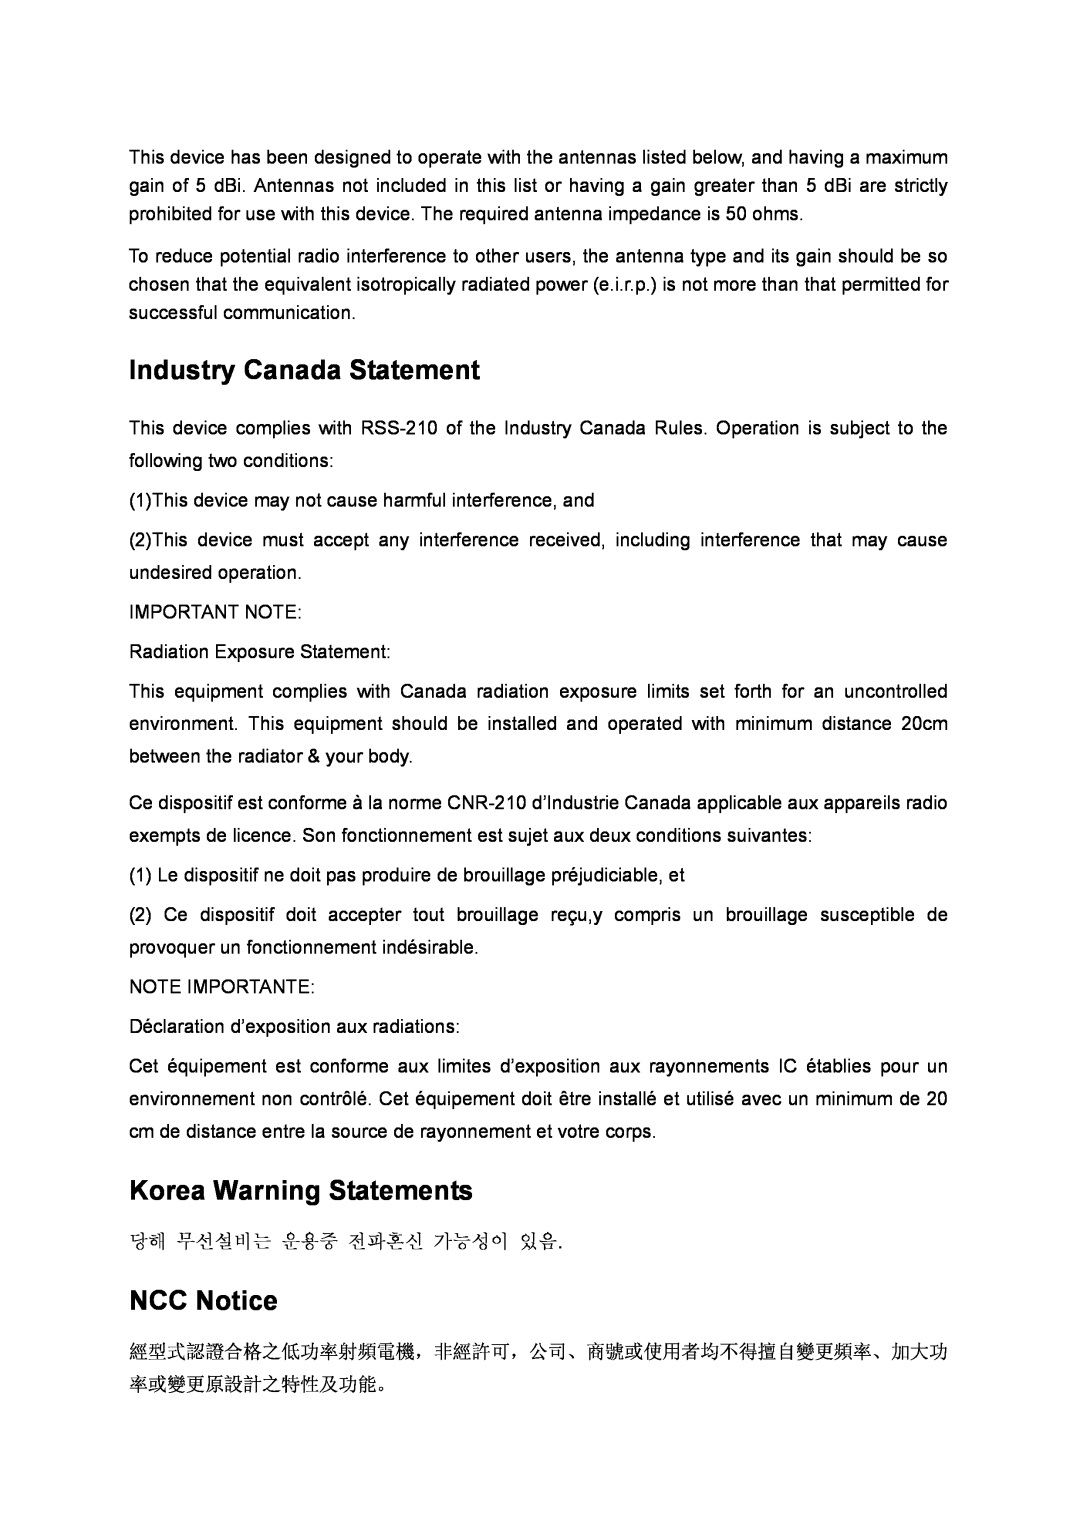 TP-Link TL-WR841N manual Industry Canada Statement, Korea Warning Statements, NCC Notice 